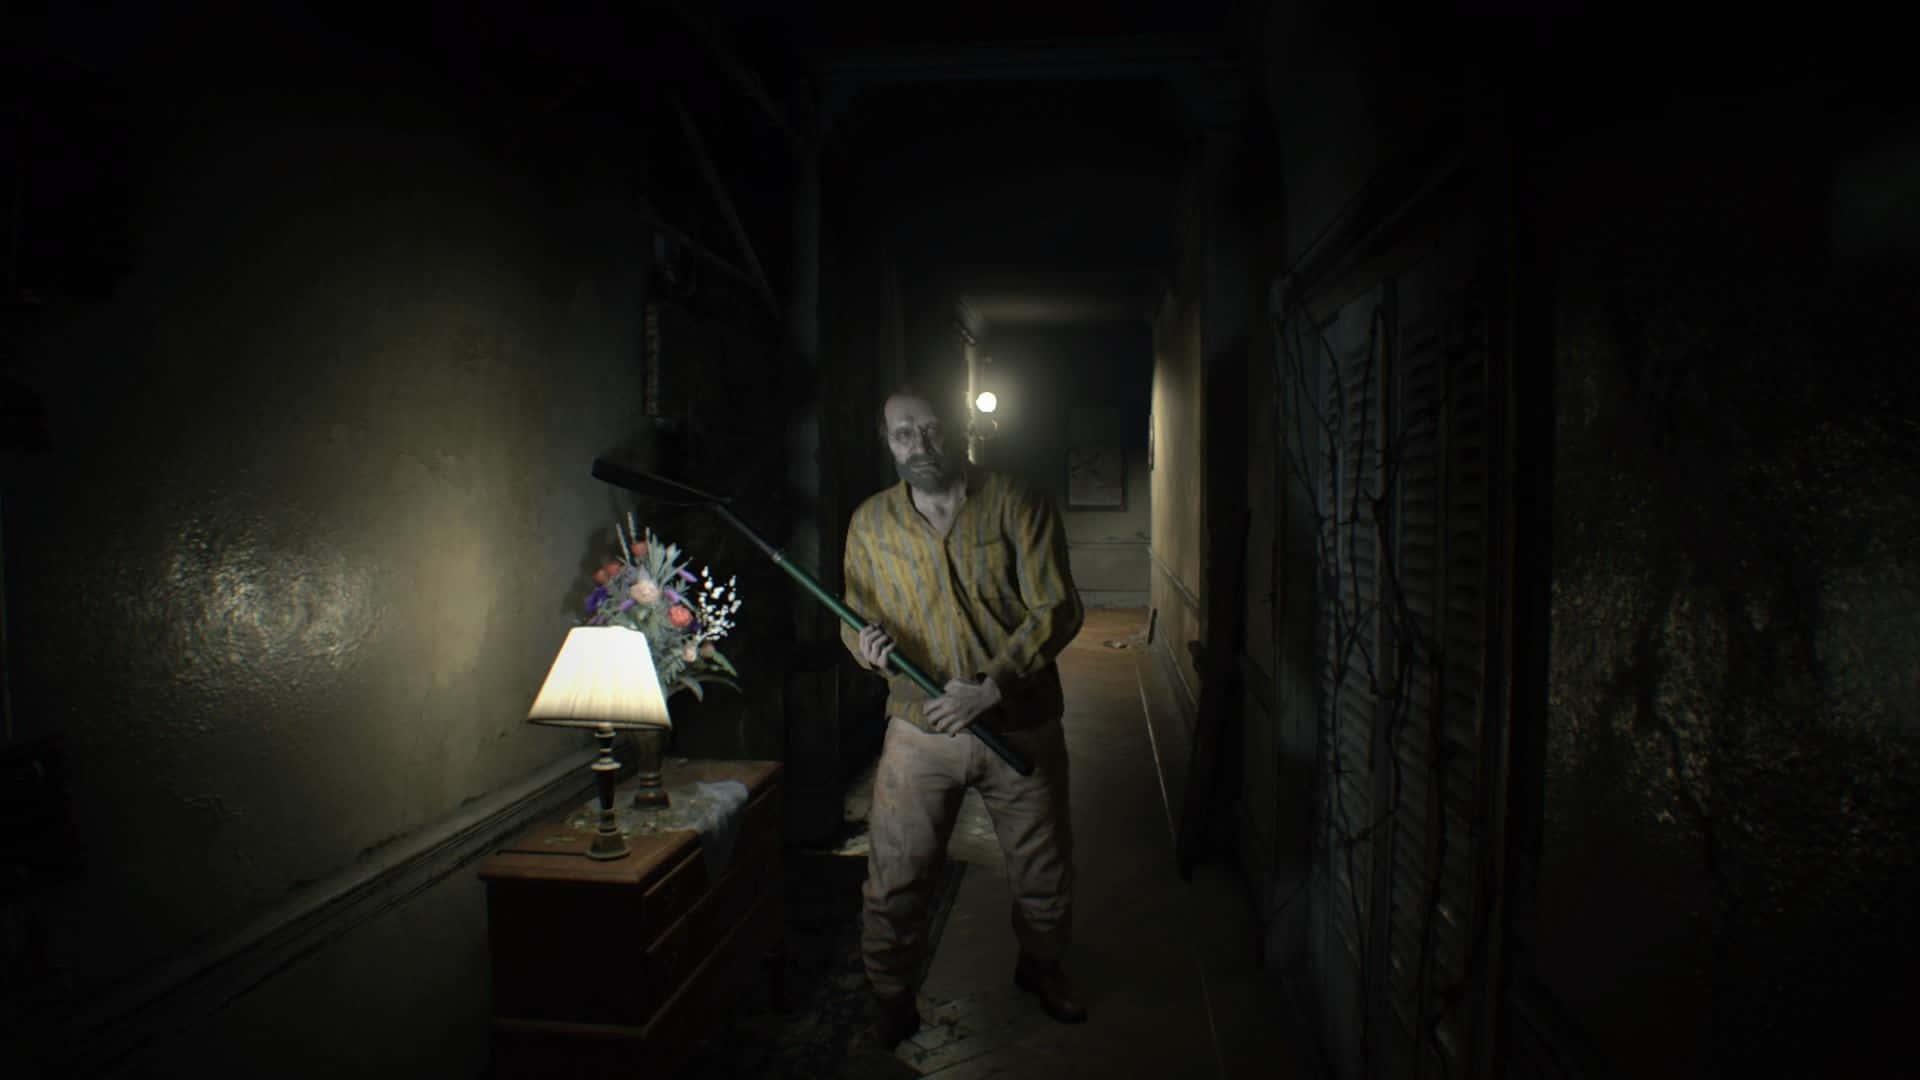 Intense Moment From Resident Evil 7 Game: Character Standing In A Creepy Room With A Pistol Aimed Ahead. Wallpaper